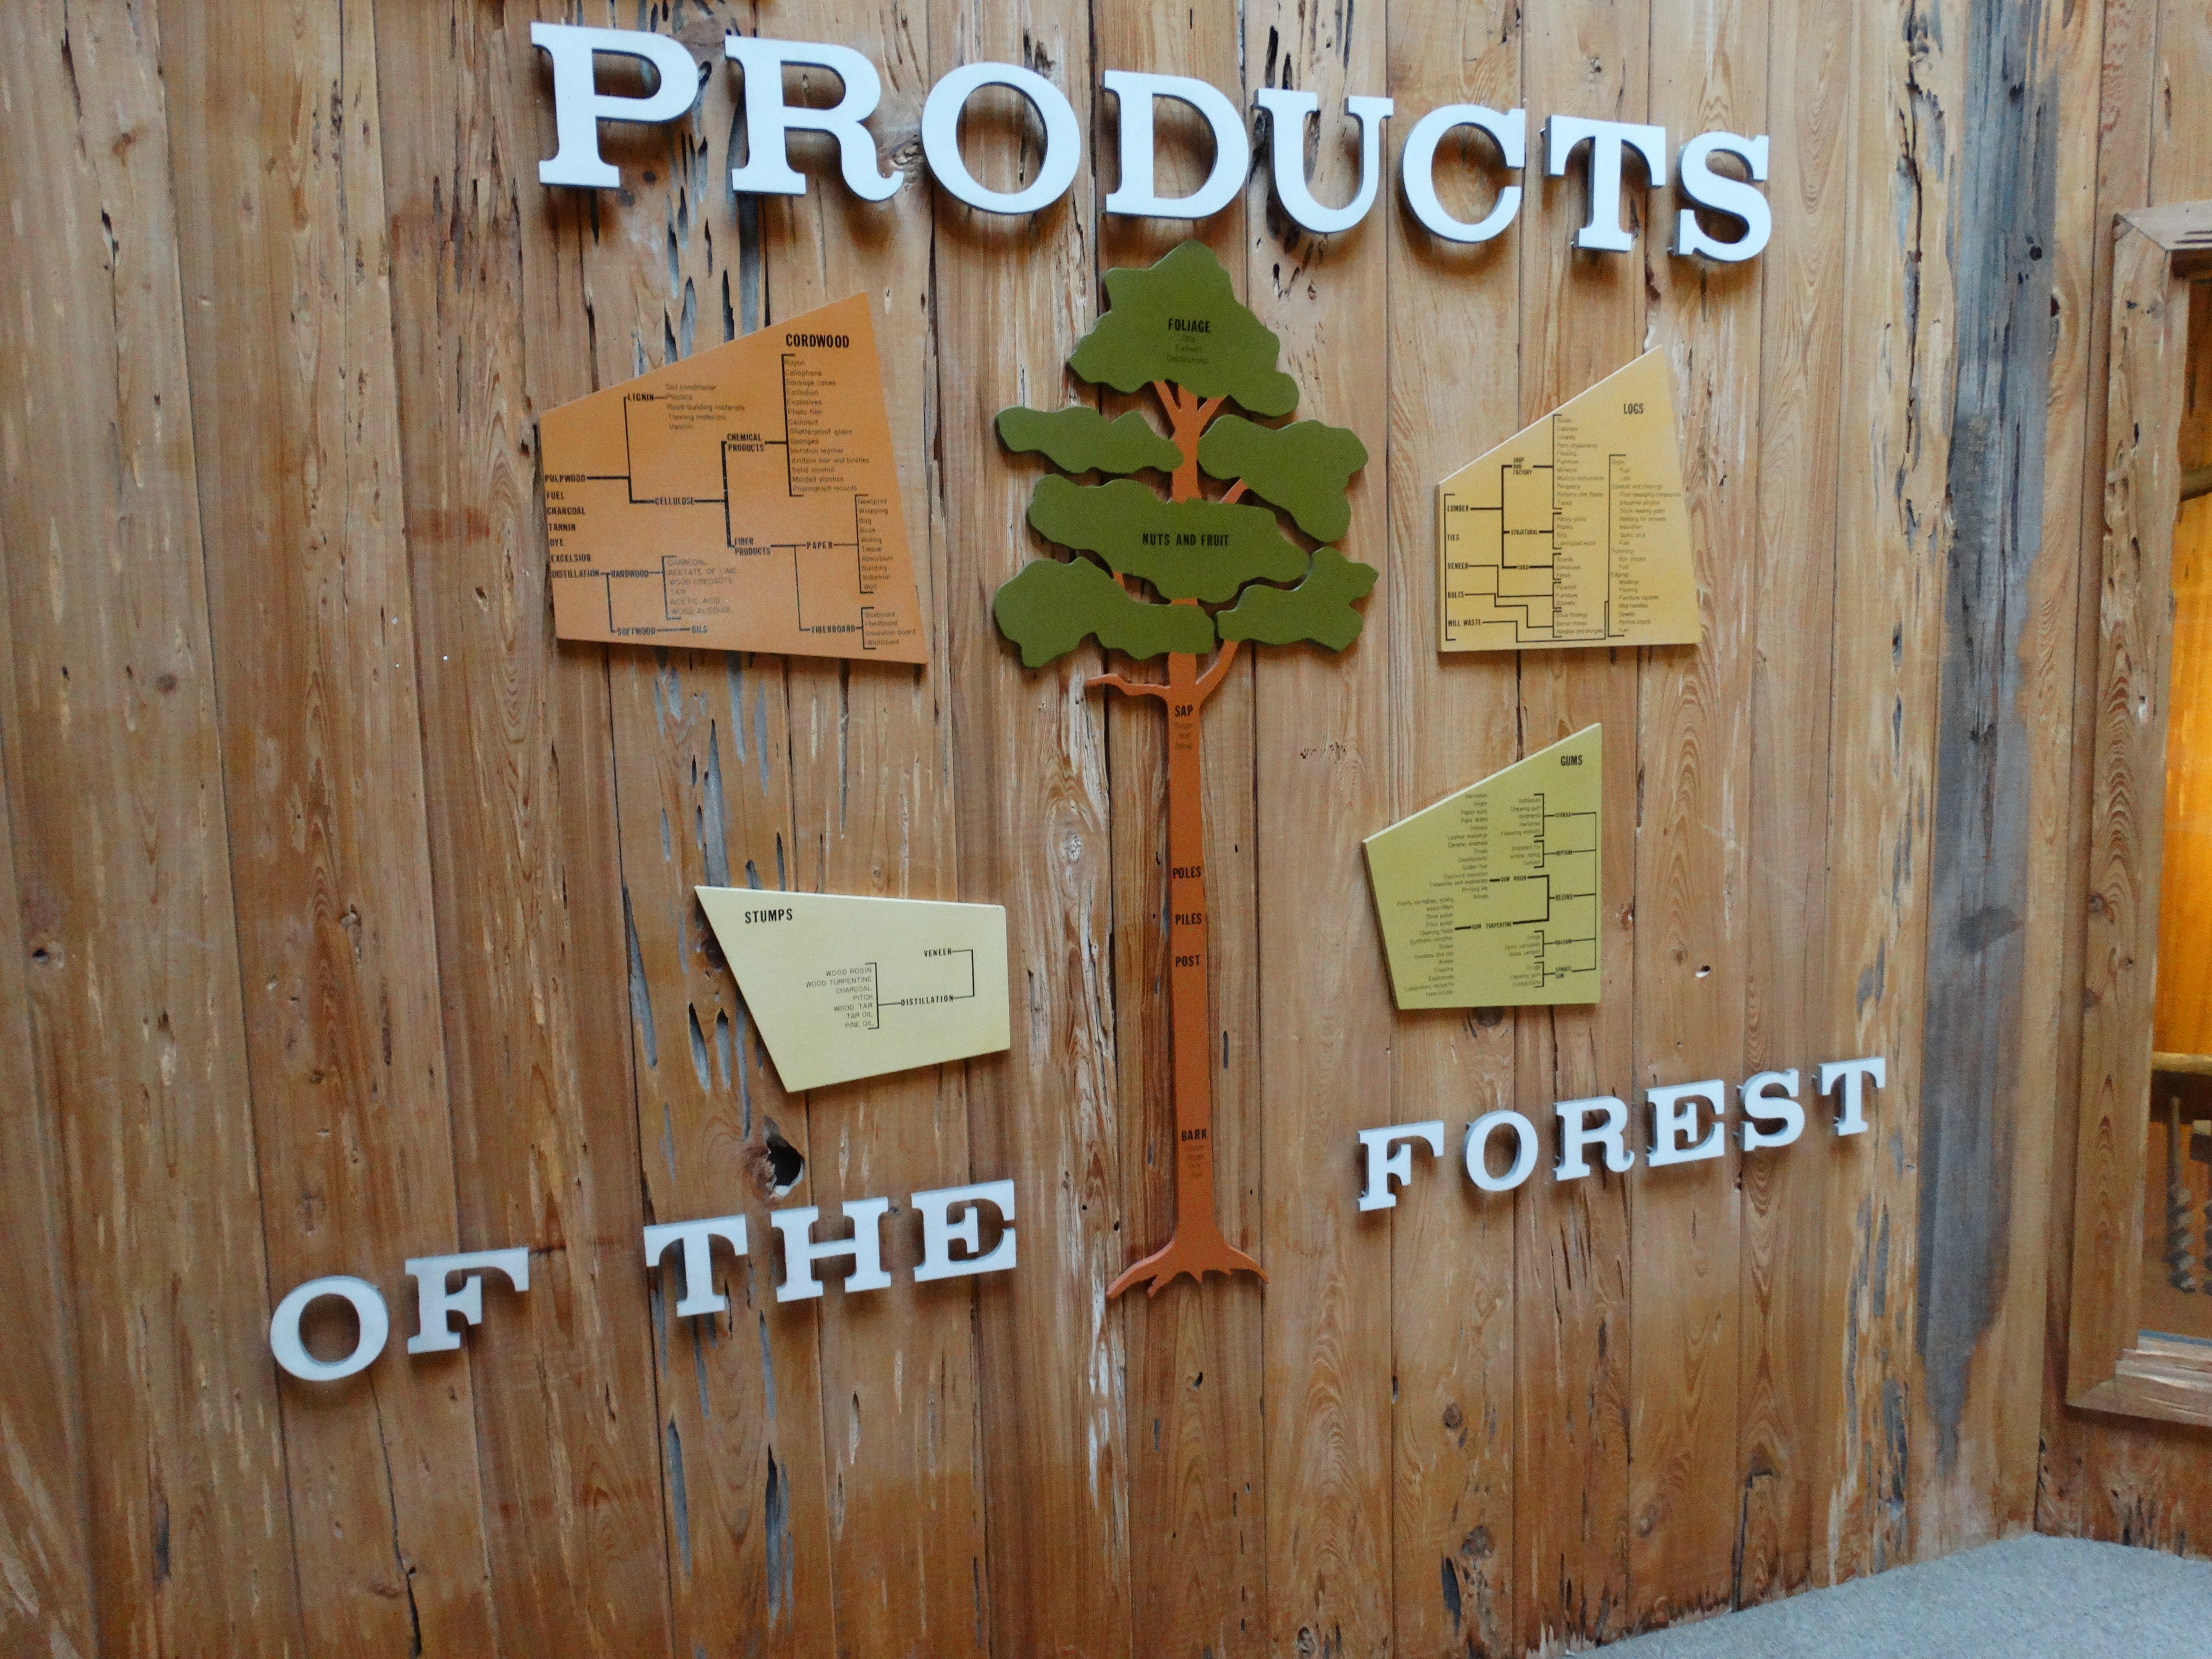 a wooden panel exhibit titled "products of the forest" with an image of a tree.